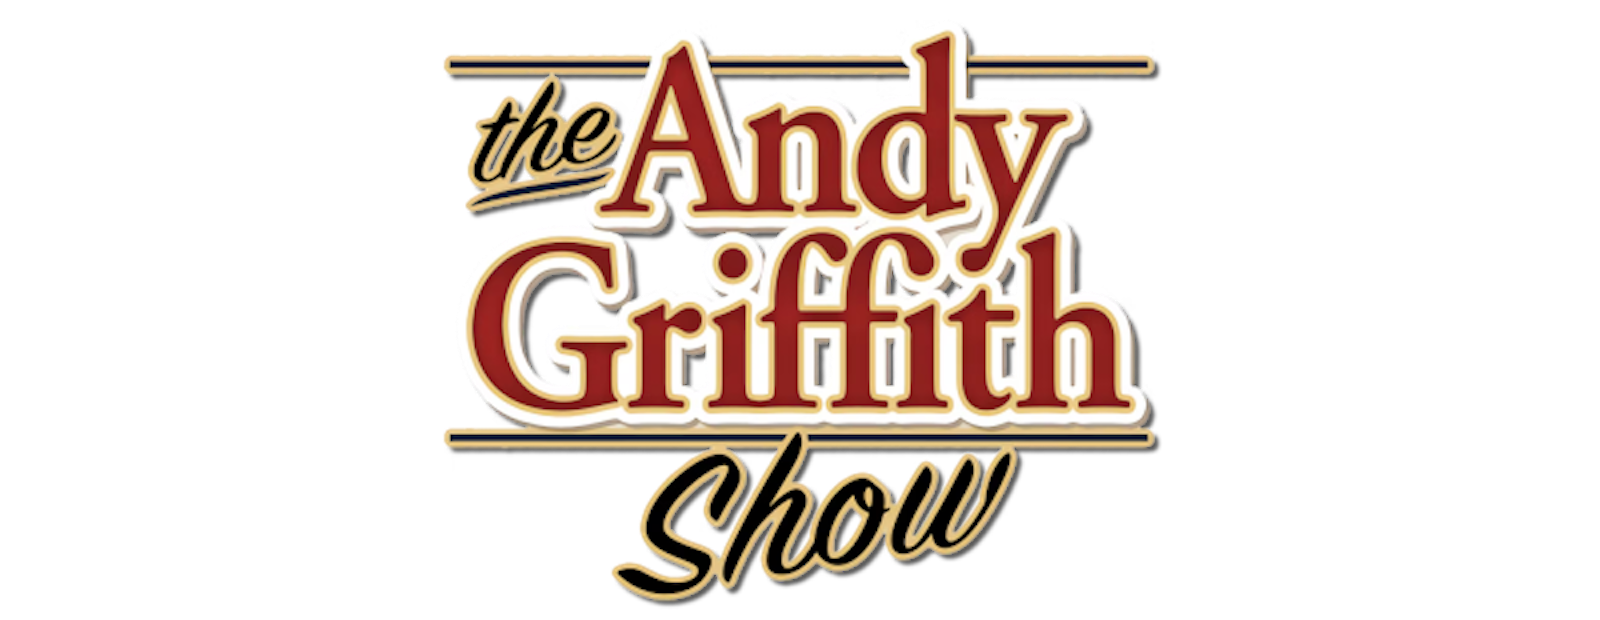 Andy Griffith Show logo.